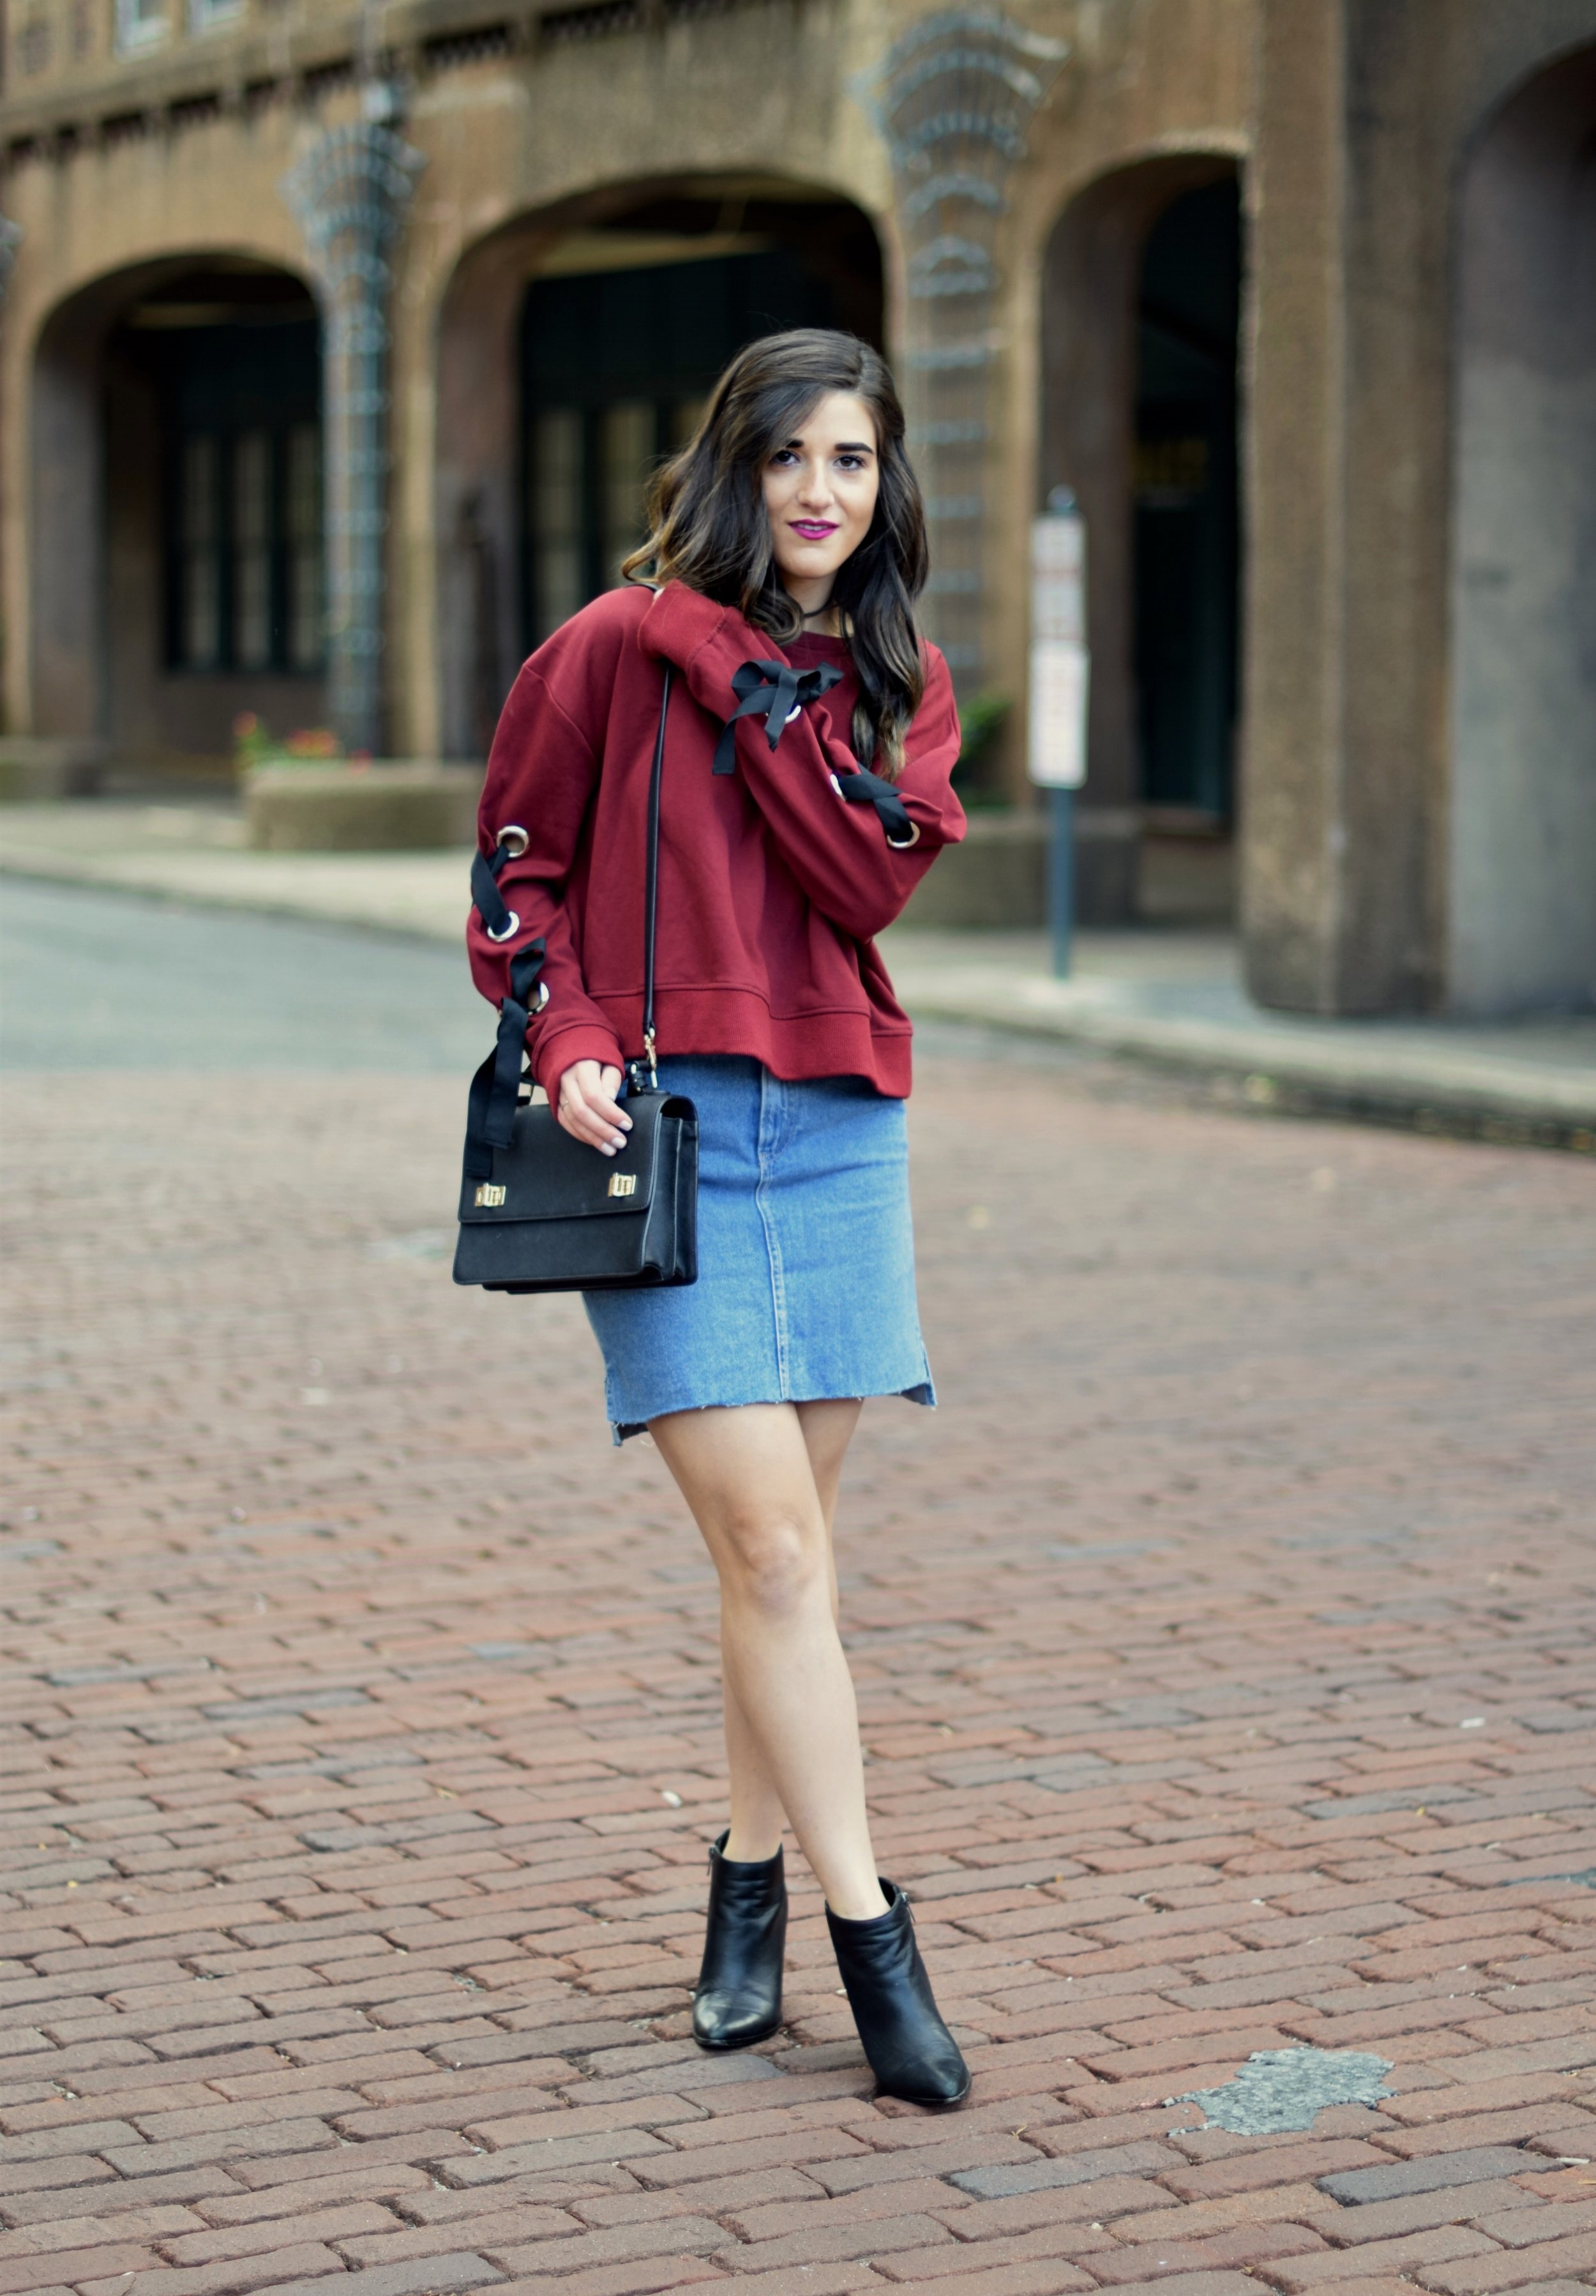 Red Lace-Up Sleeve Sweatshirt Denim Skirt 10 Things I'm Thankful For This Year Esther Santer Fashion Blog NYC Street Style Blogger Outfit OOTD Trendy Girl Women Choker Black Booties Hair Brunette Henri  Bendel West 57th Schoolbag Winter Look Fall Shop.jpg